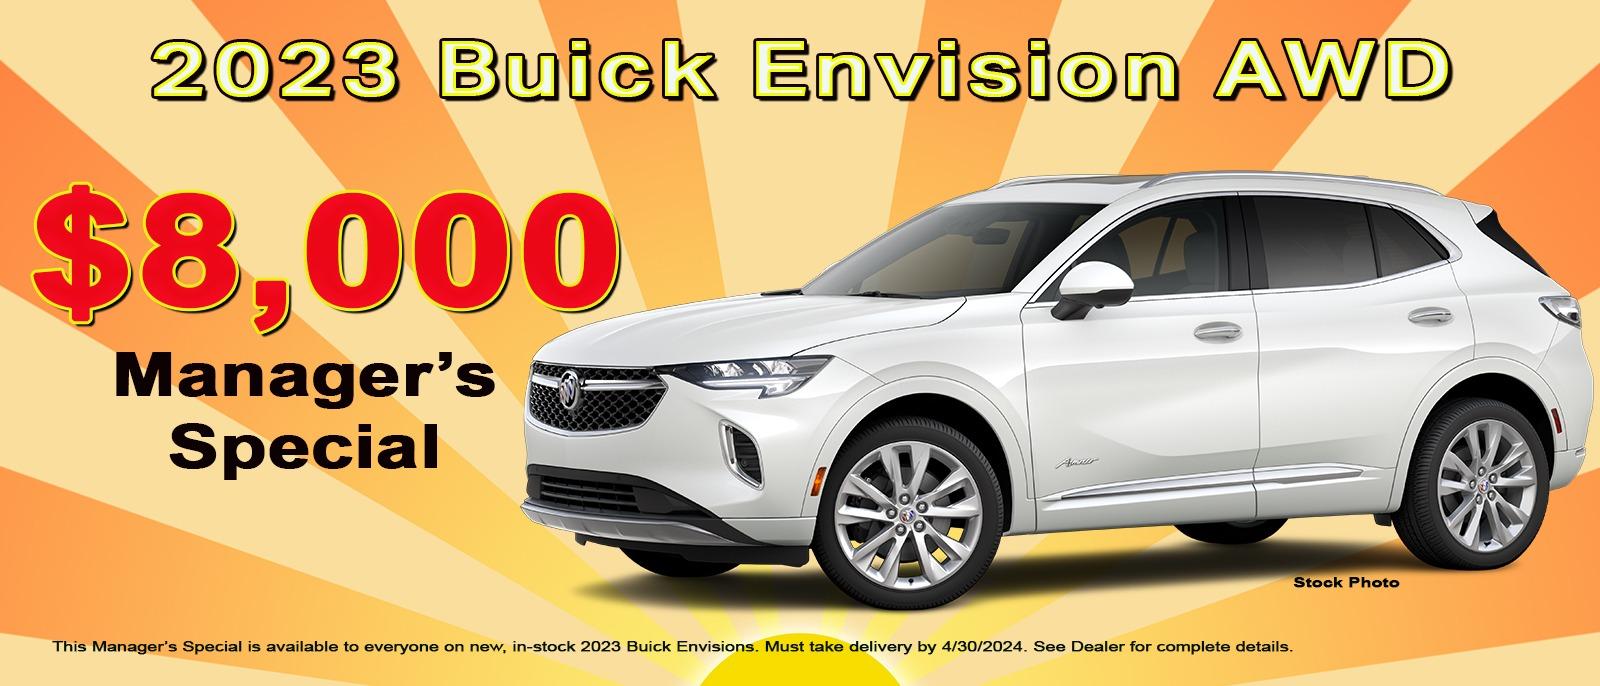 Save $8000 on your new Buick Envision